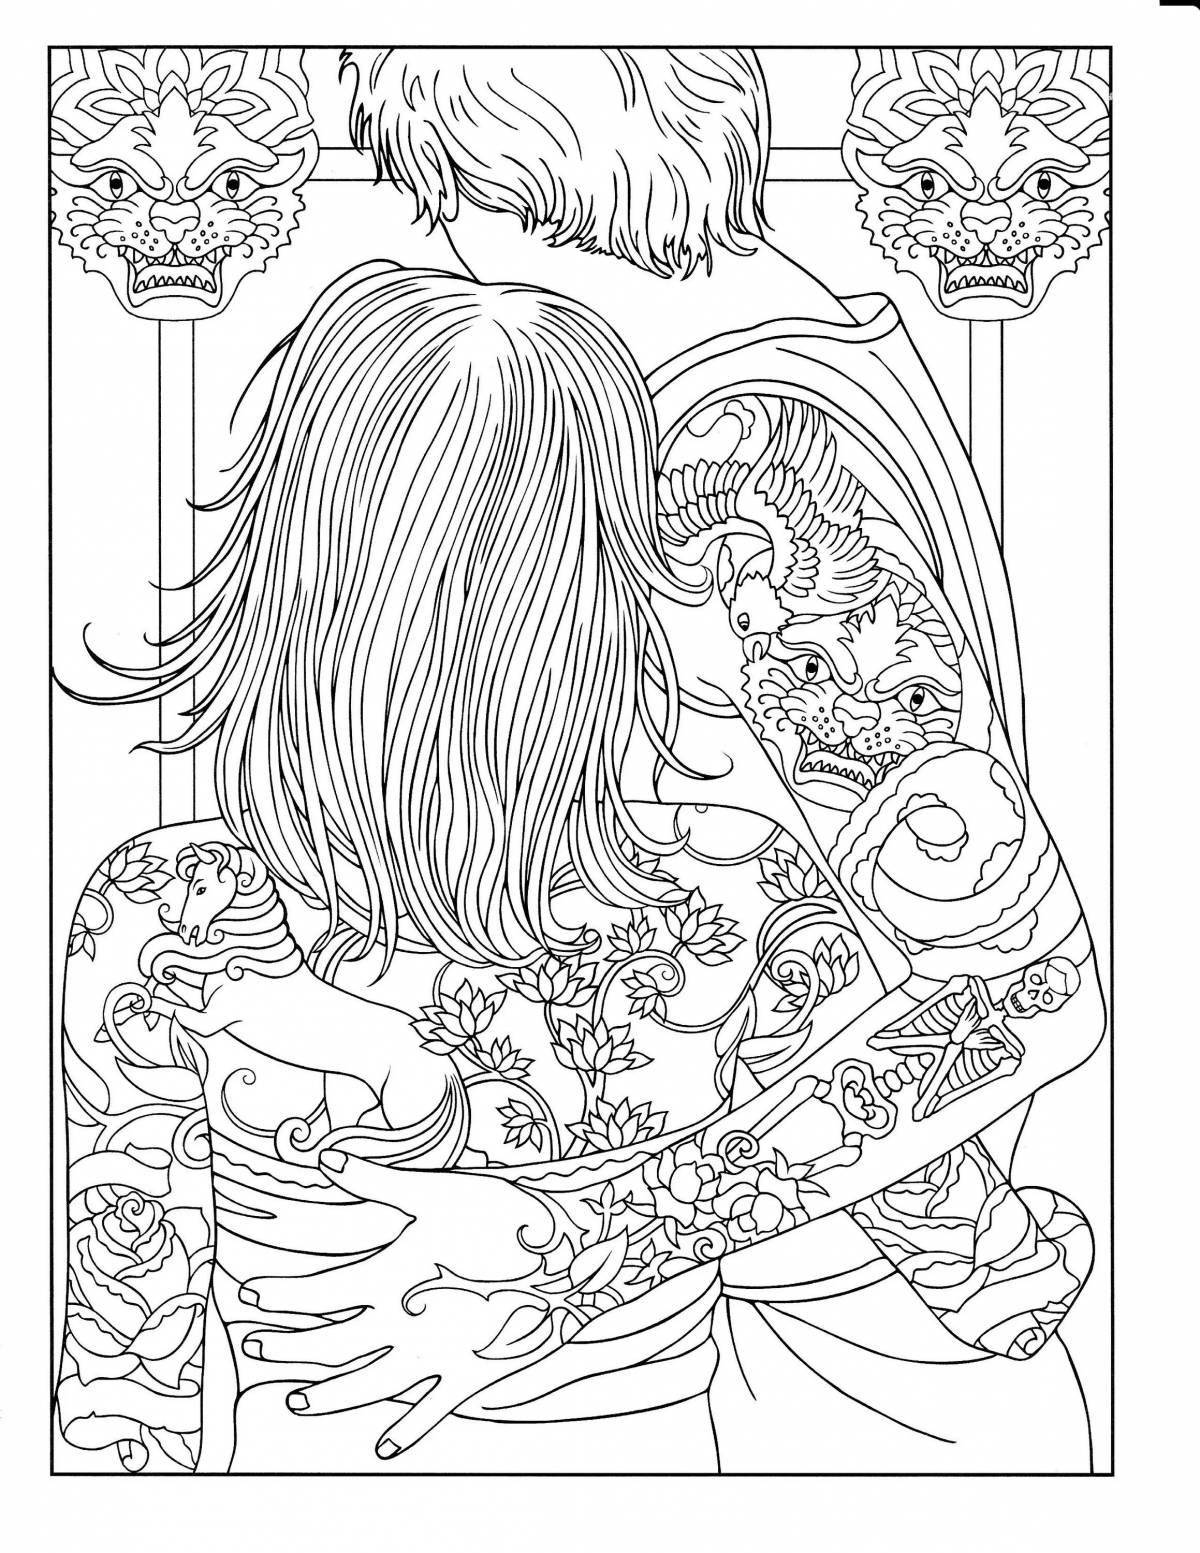 Colourful anti-stress coloring pages for men